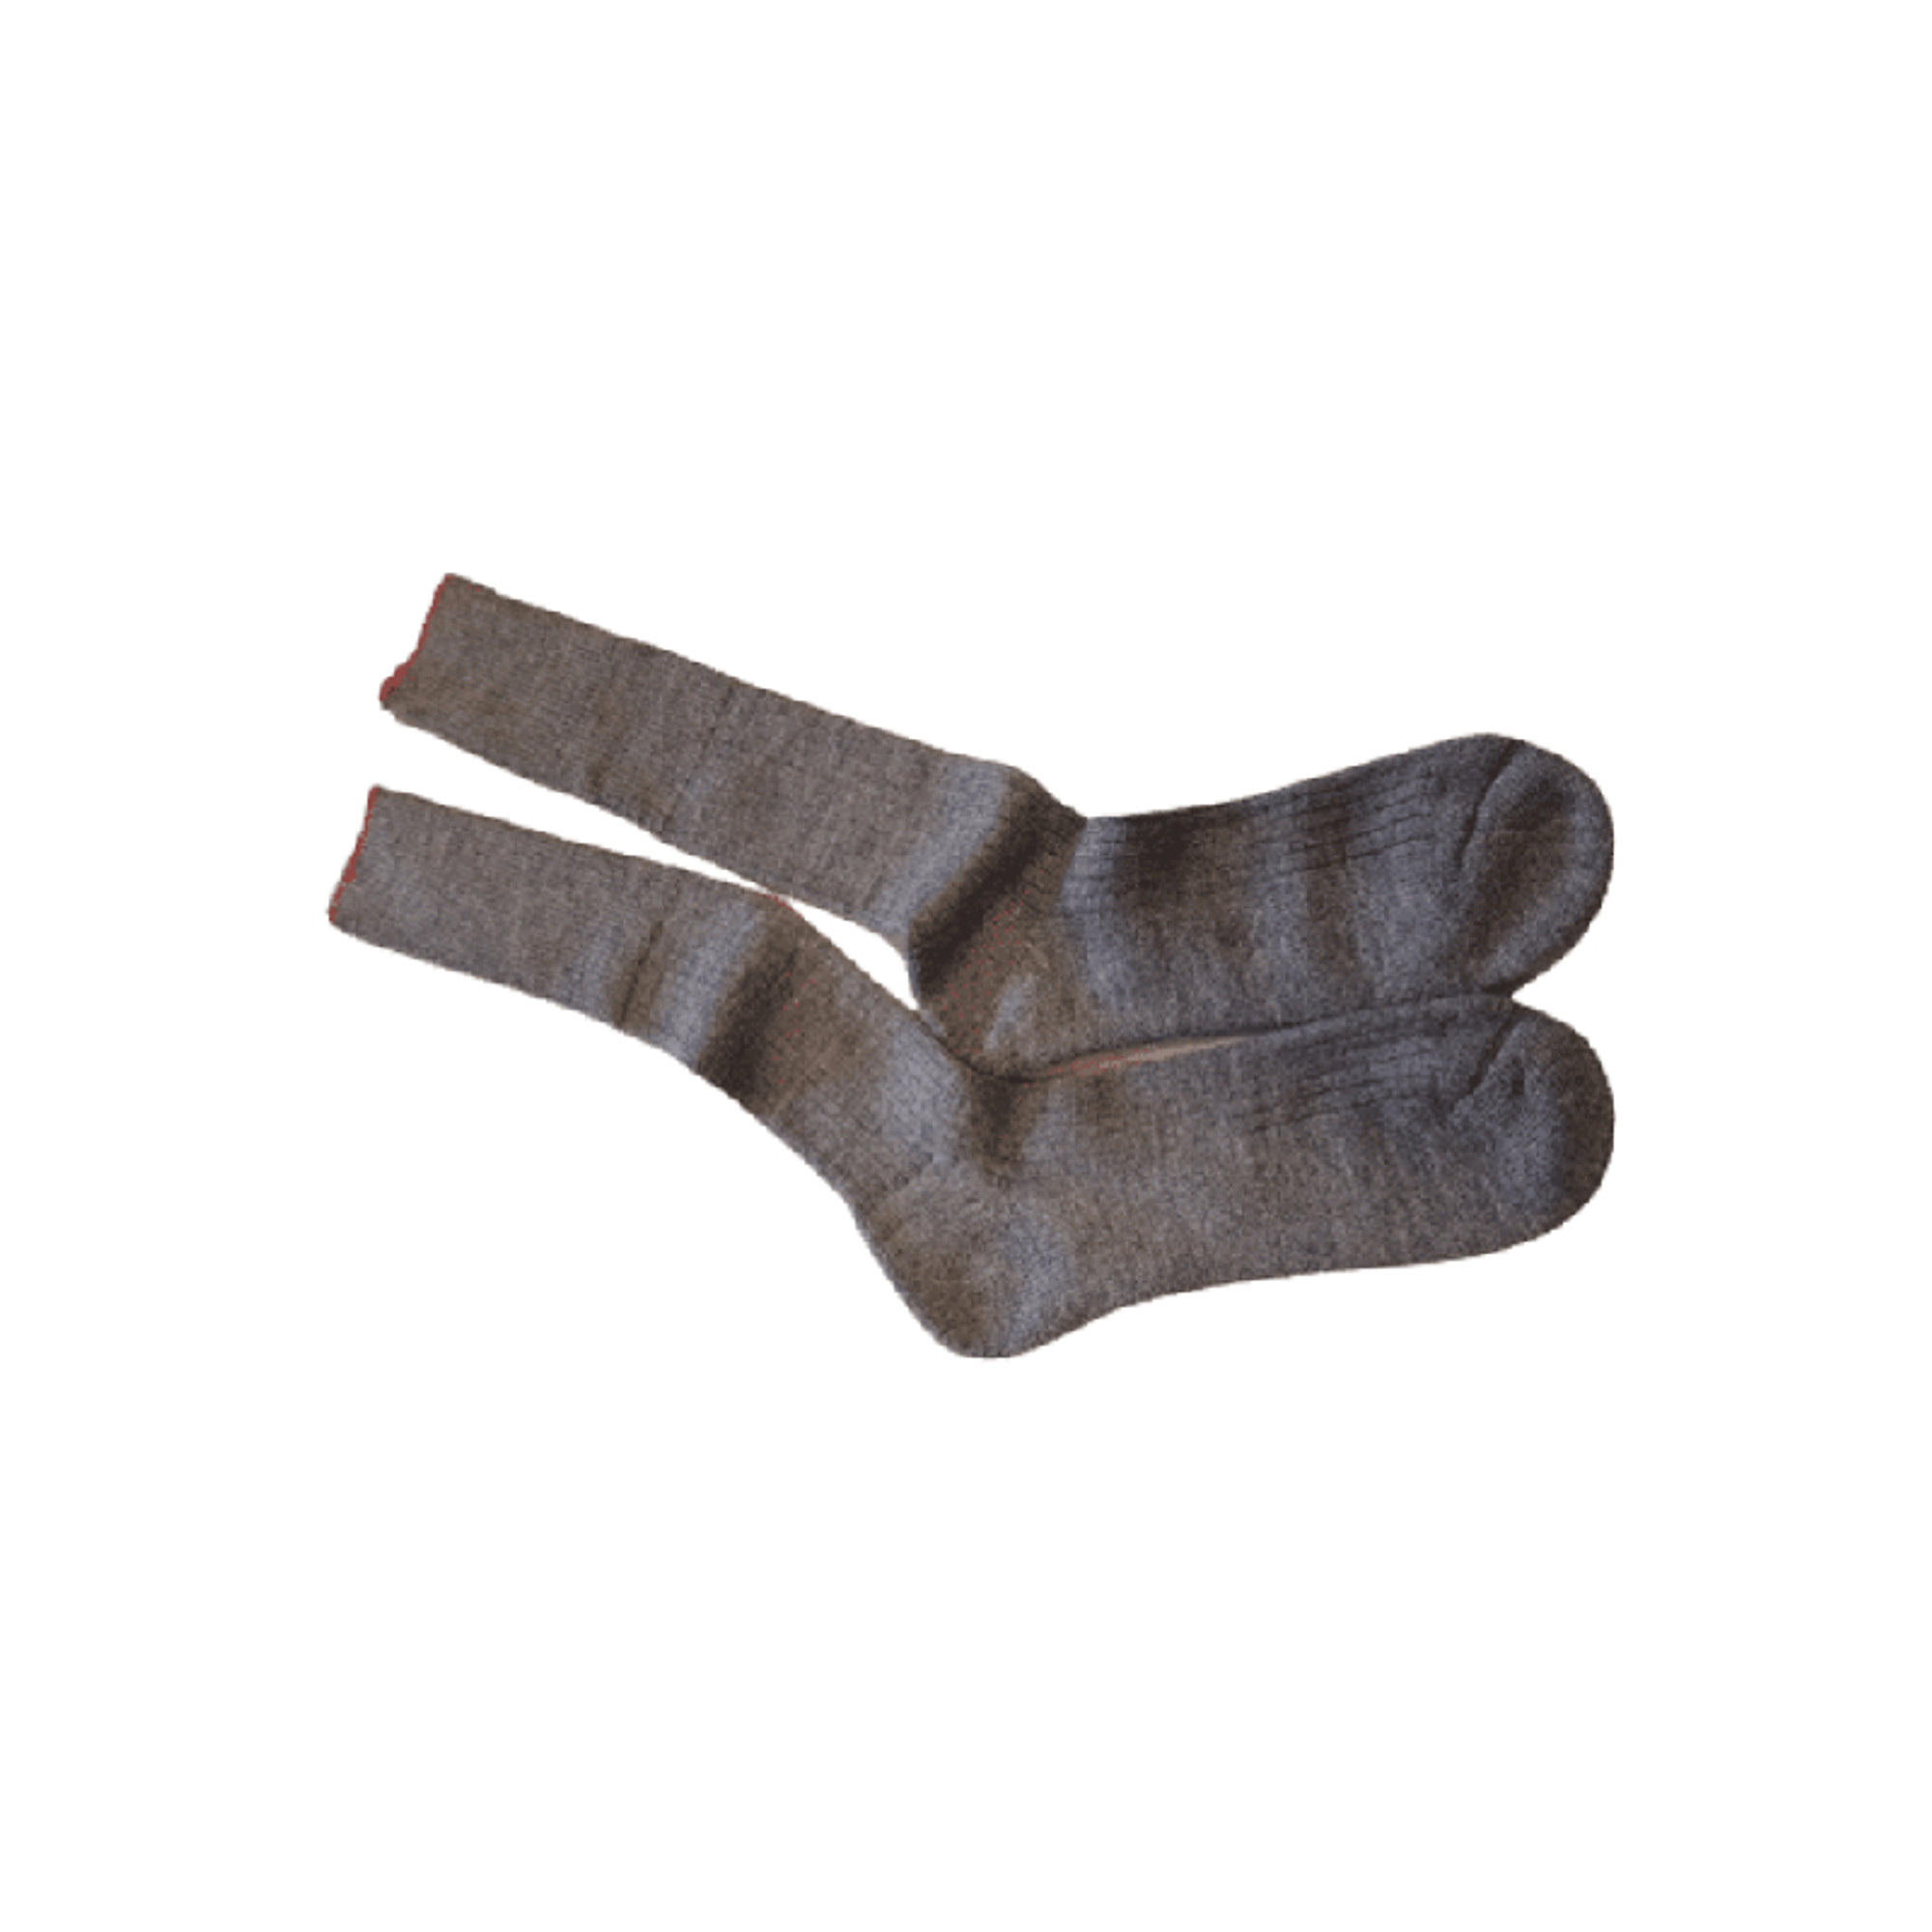 Canadian Armed Forces Temperate Wool Sock - 3 Pack